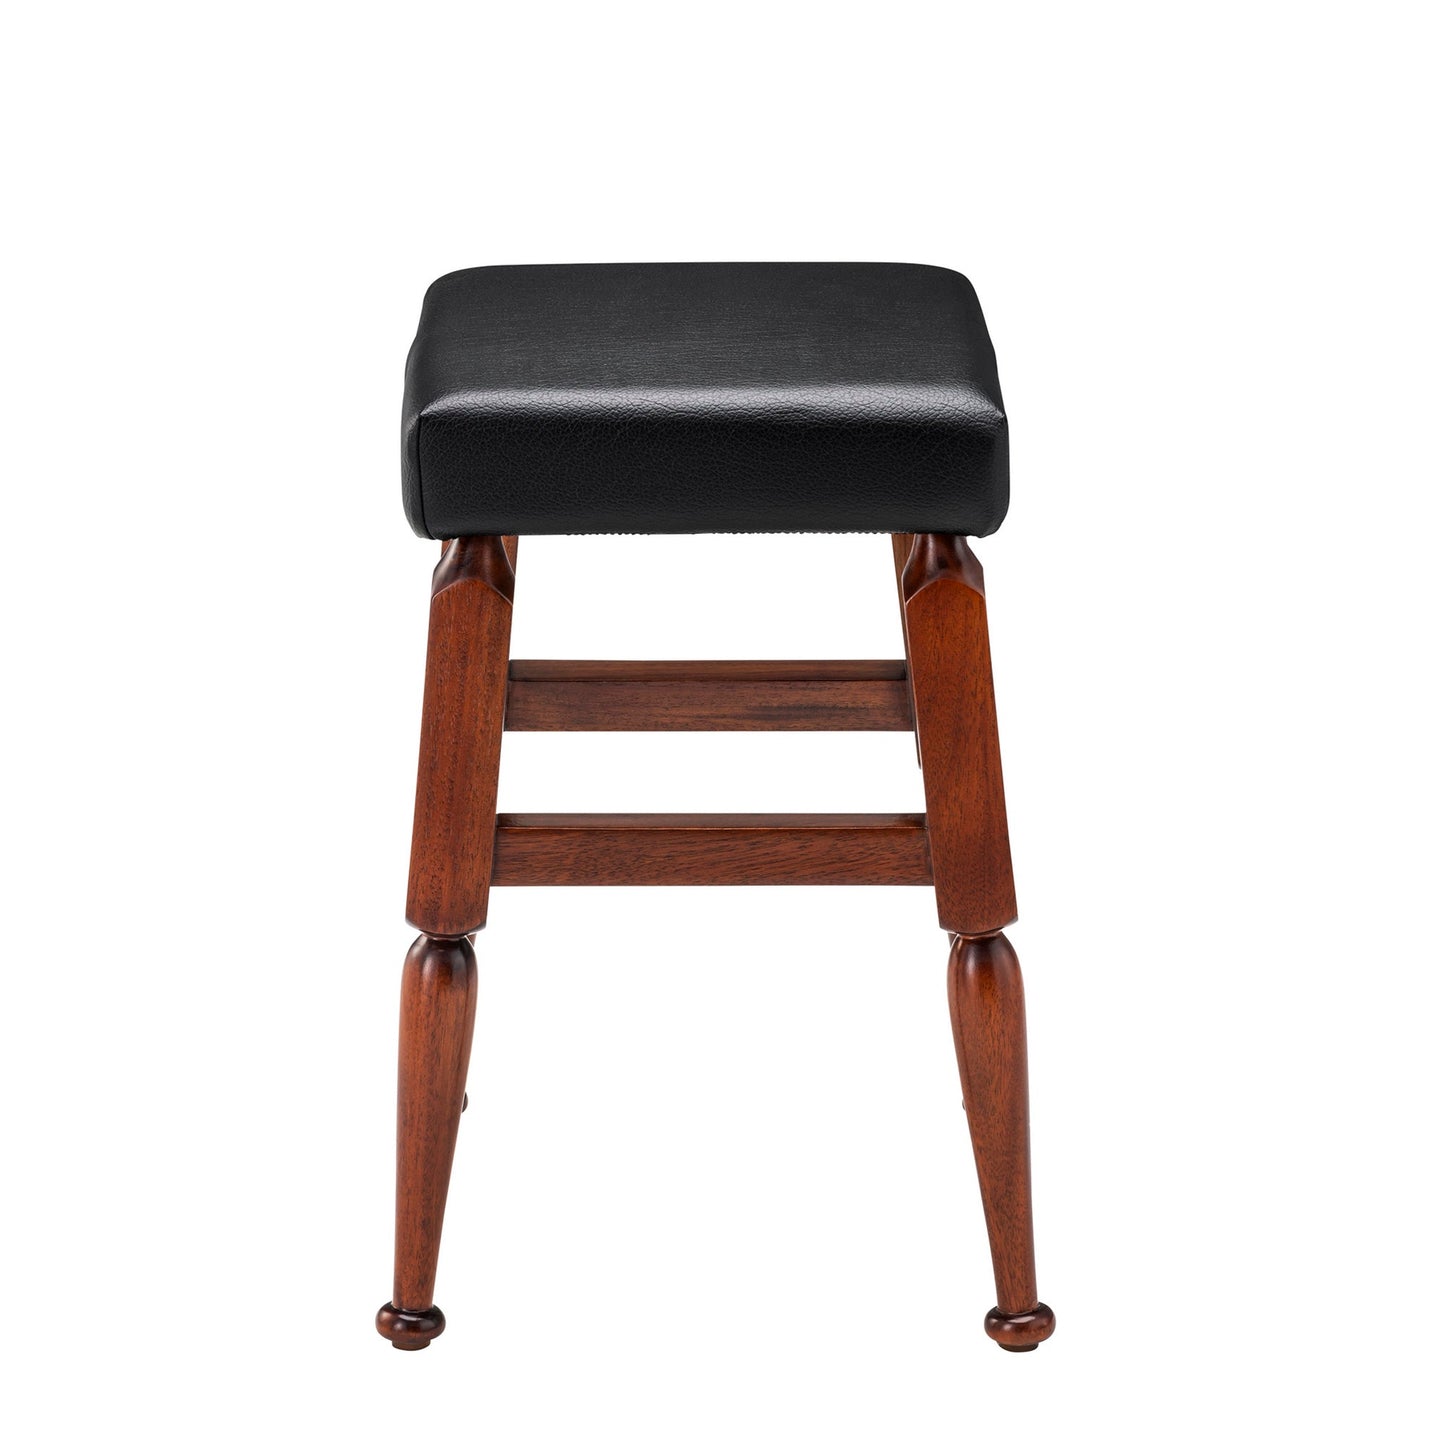 Authentic Models Mayan Low Barstool, Black - The Bar Design